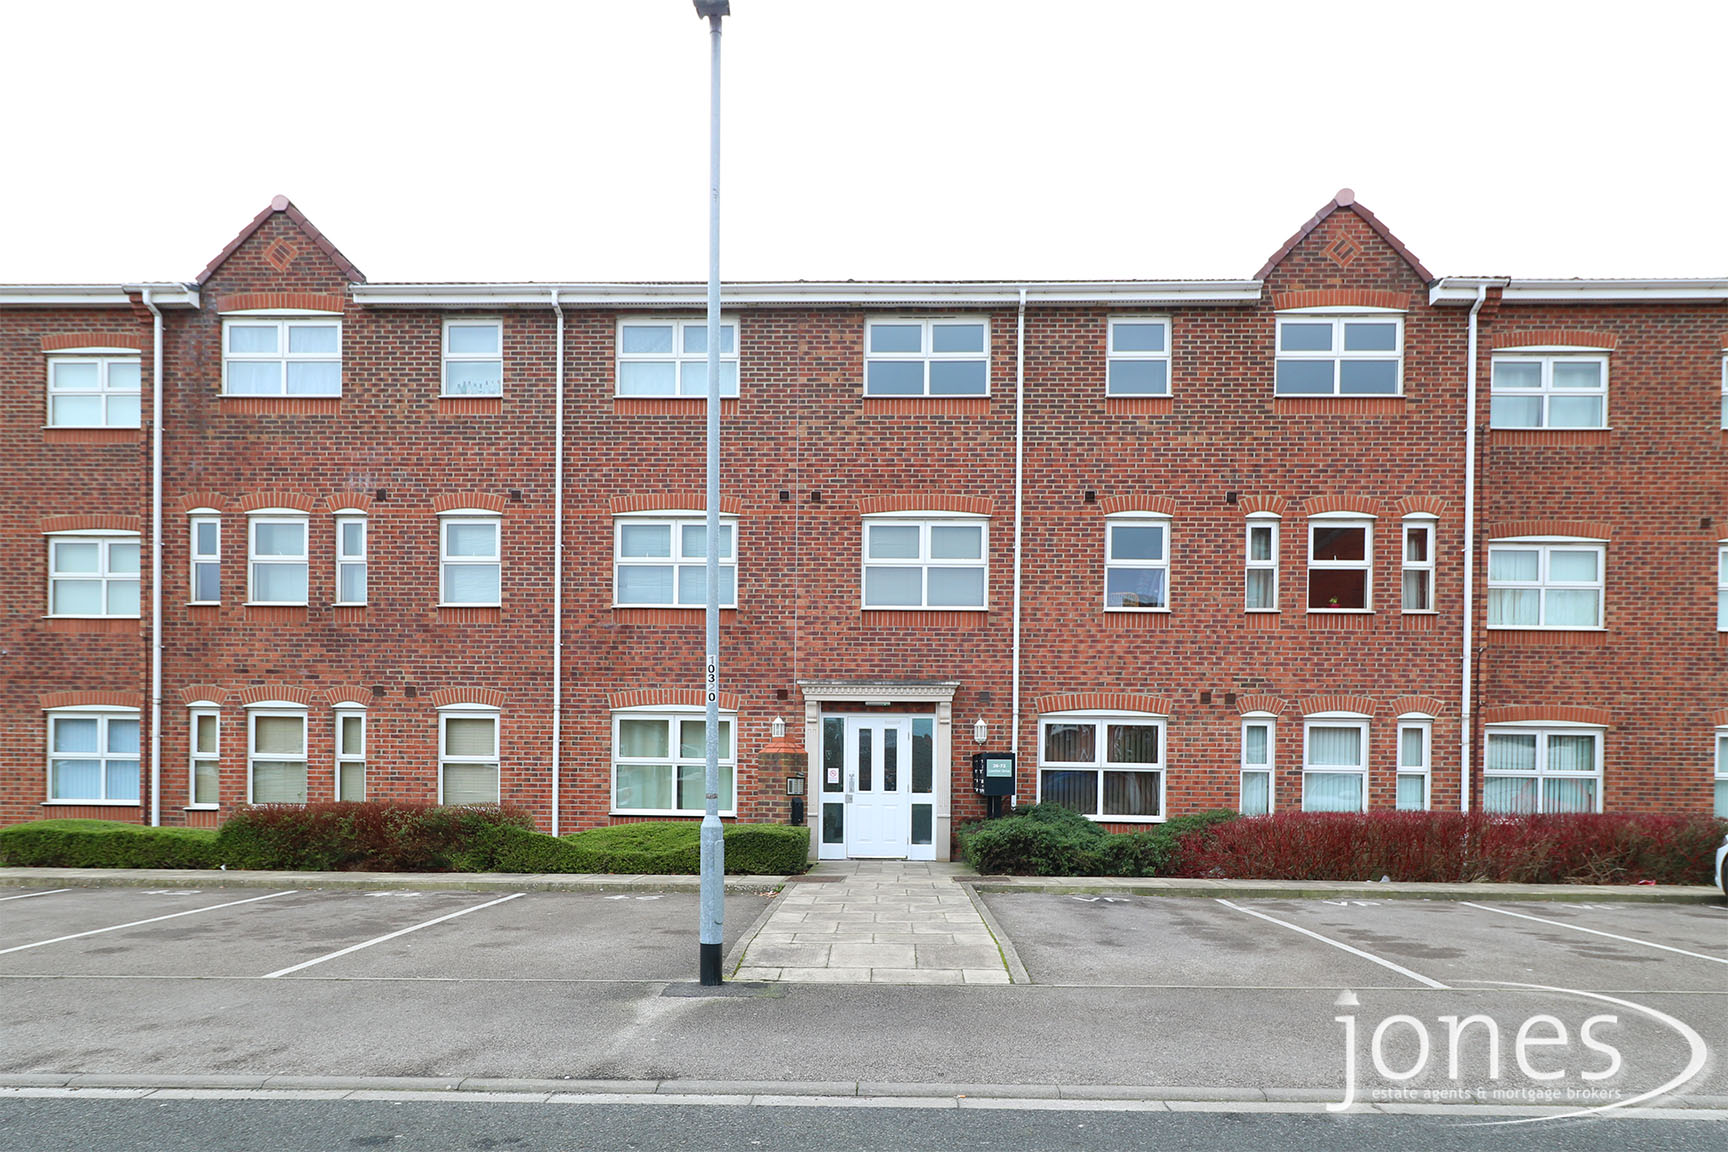 Home for Sale Let - Photo 01 Lowther Drive, Darlington, DL1 4LZ